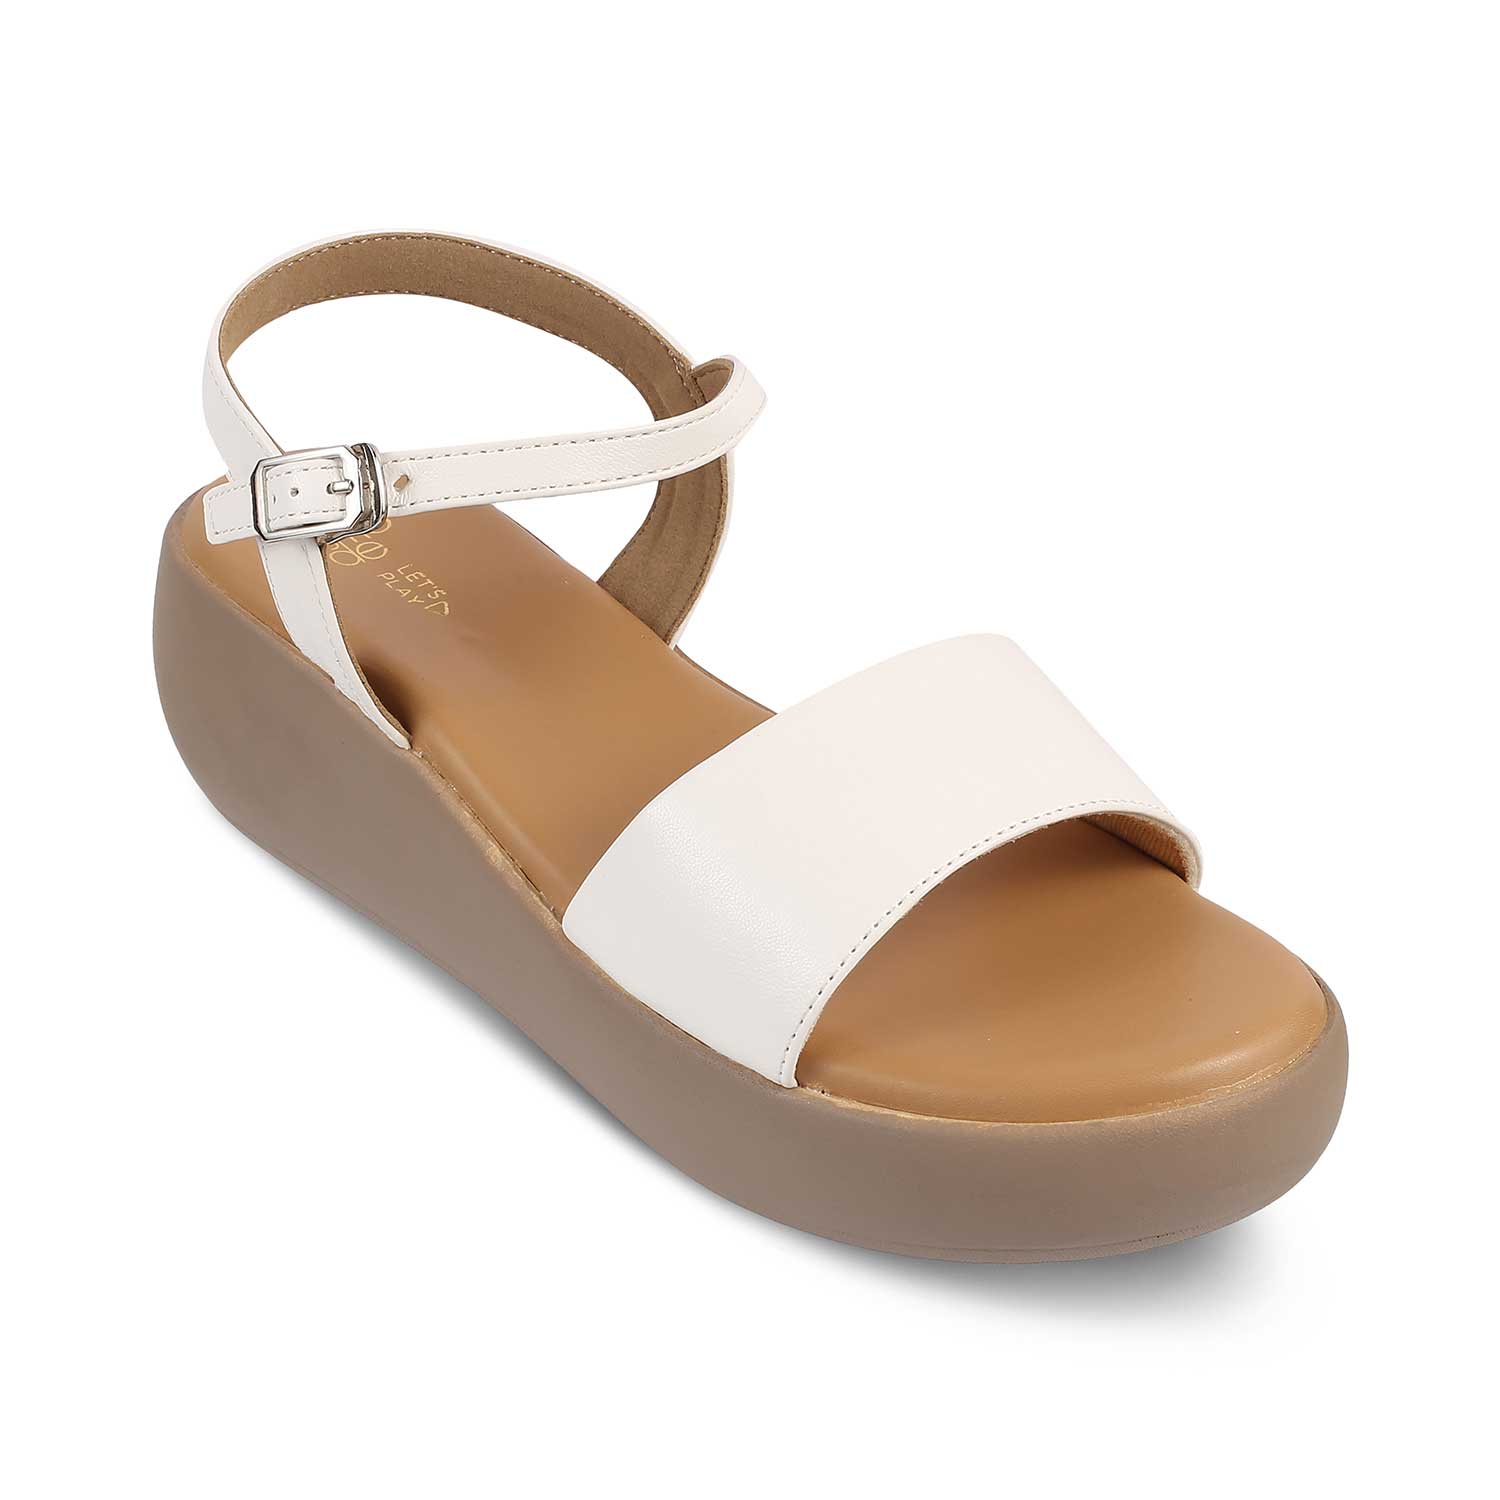 The Simpl White Women's Dress Wedge Sandals Tresmode - Tresmode